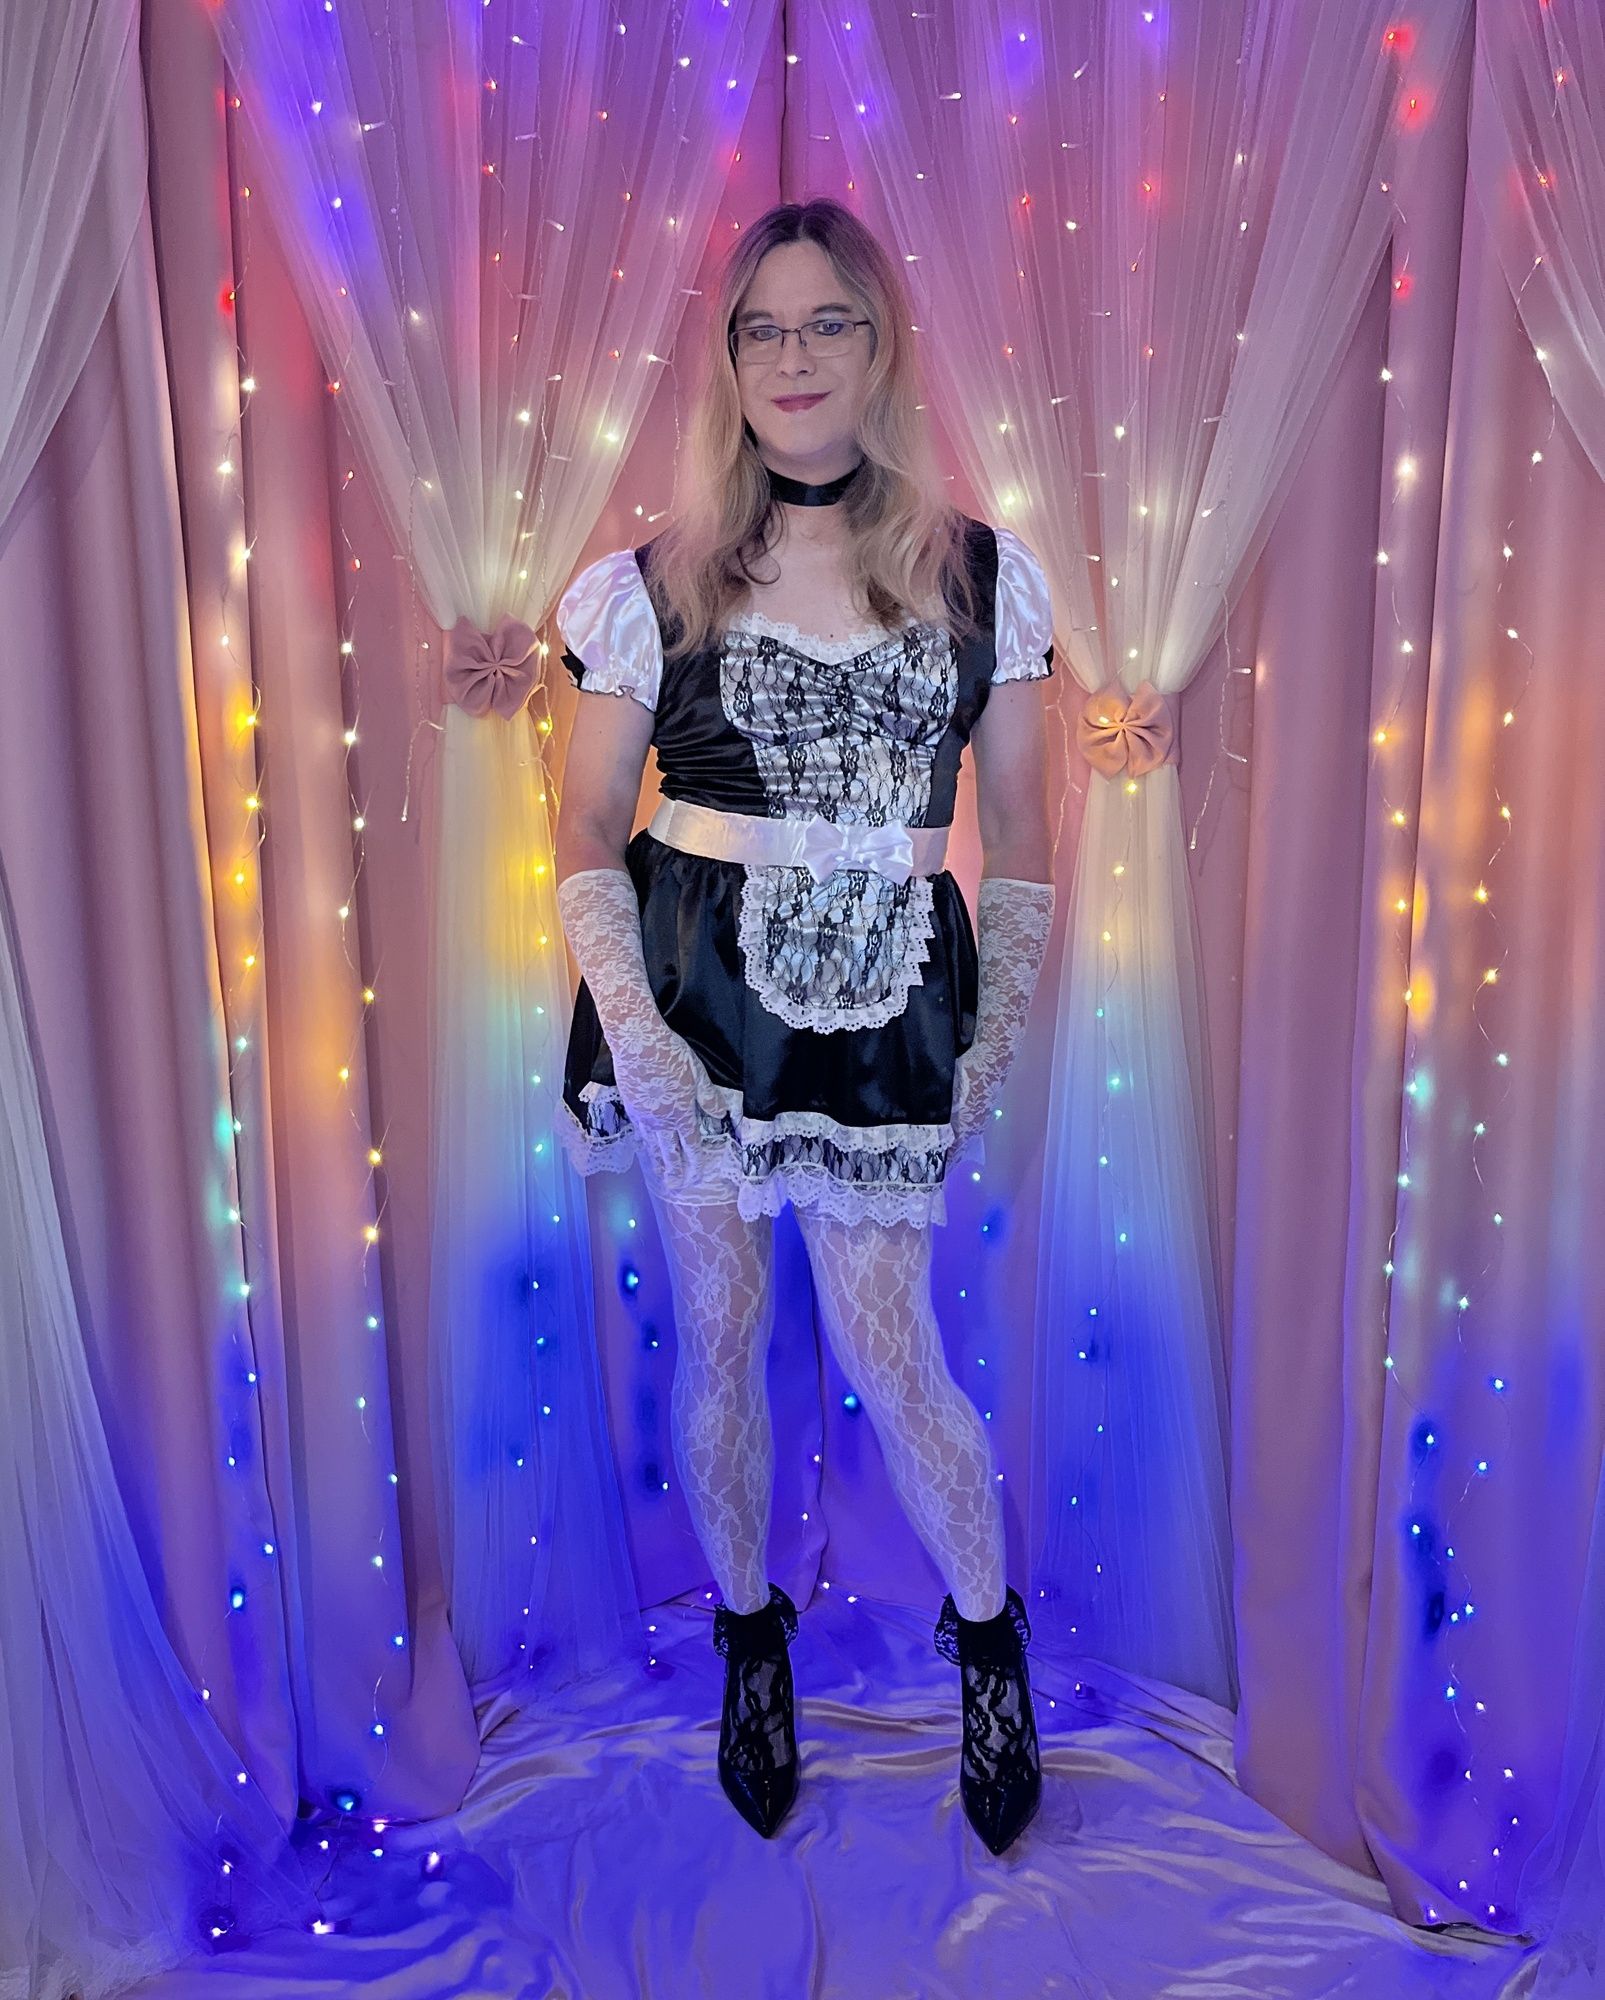 Joanie - Maid In Lace #8